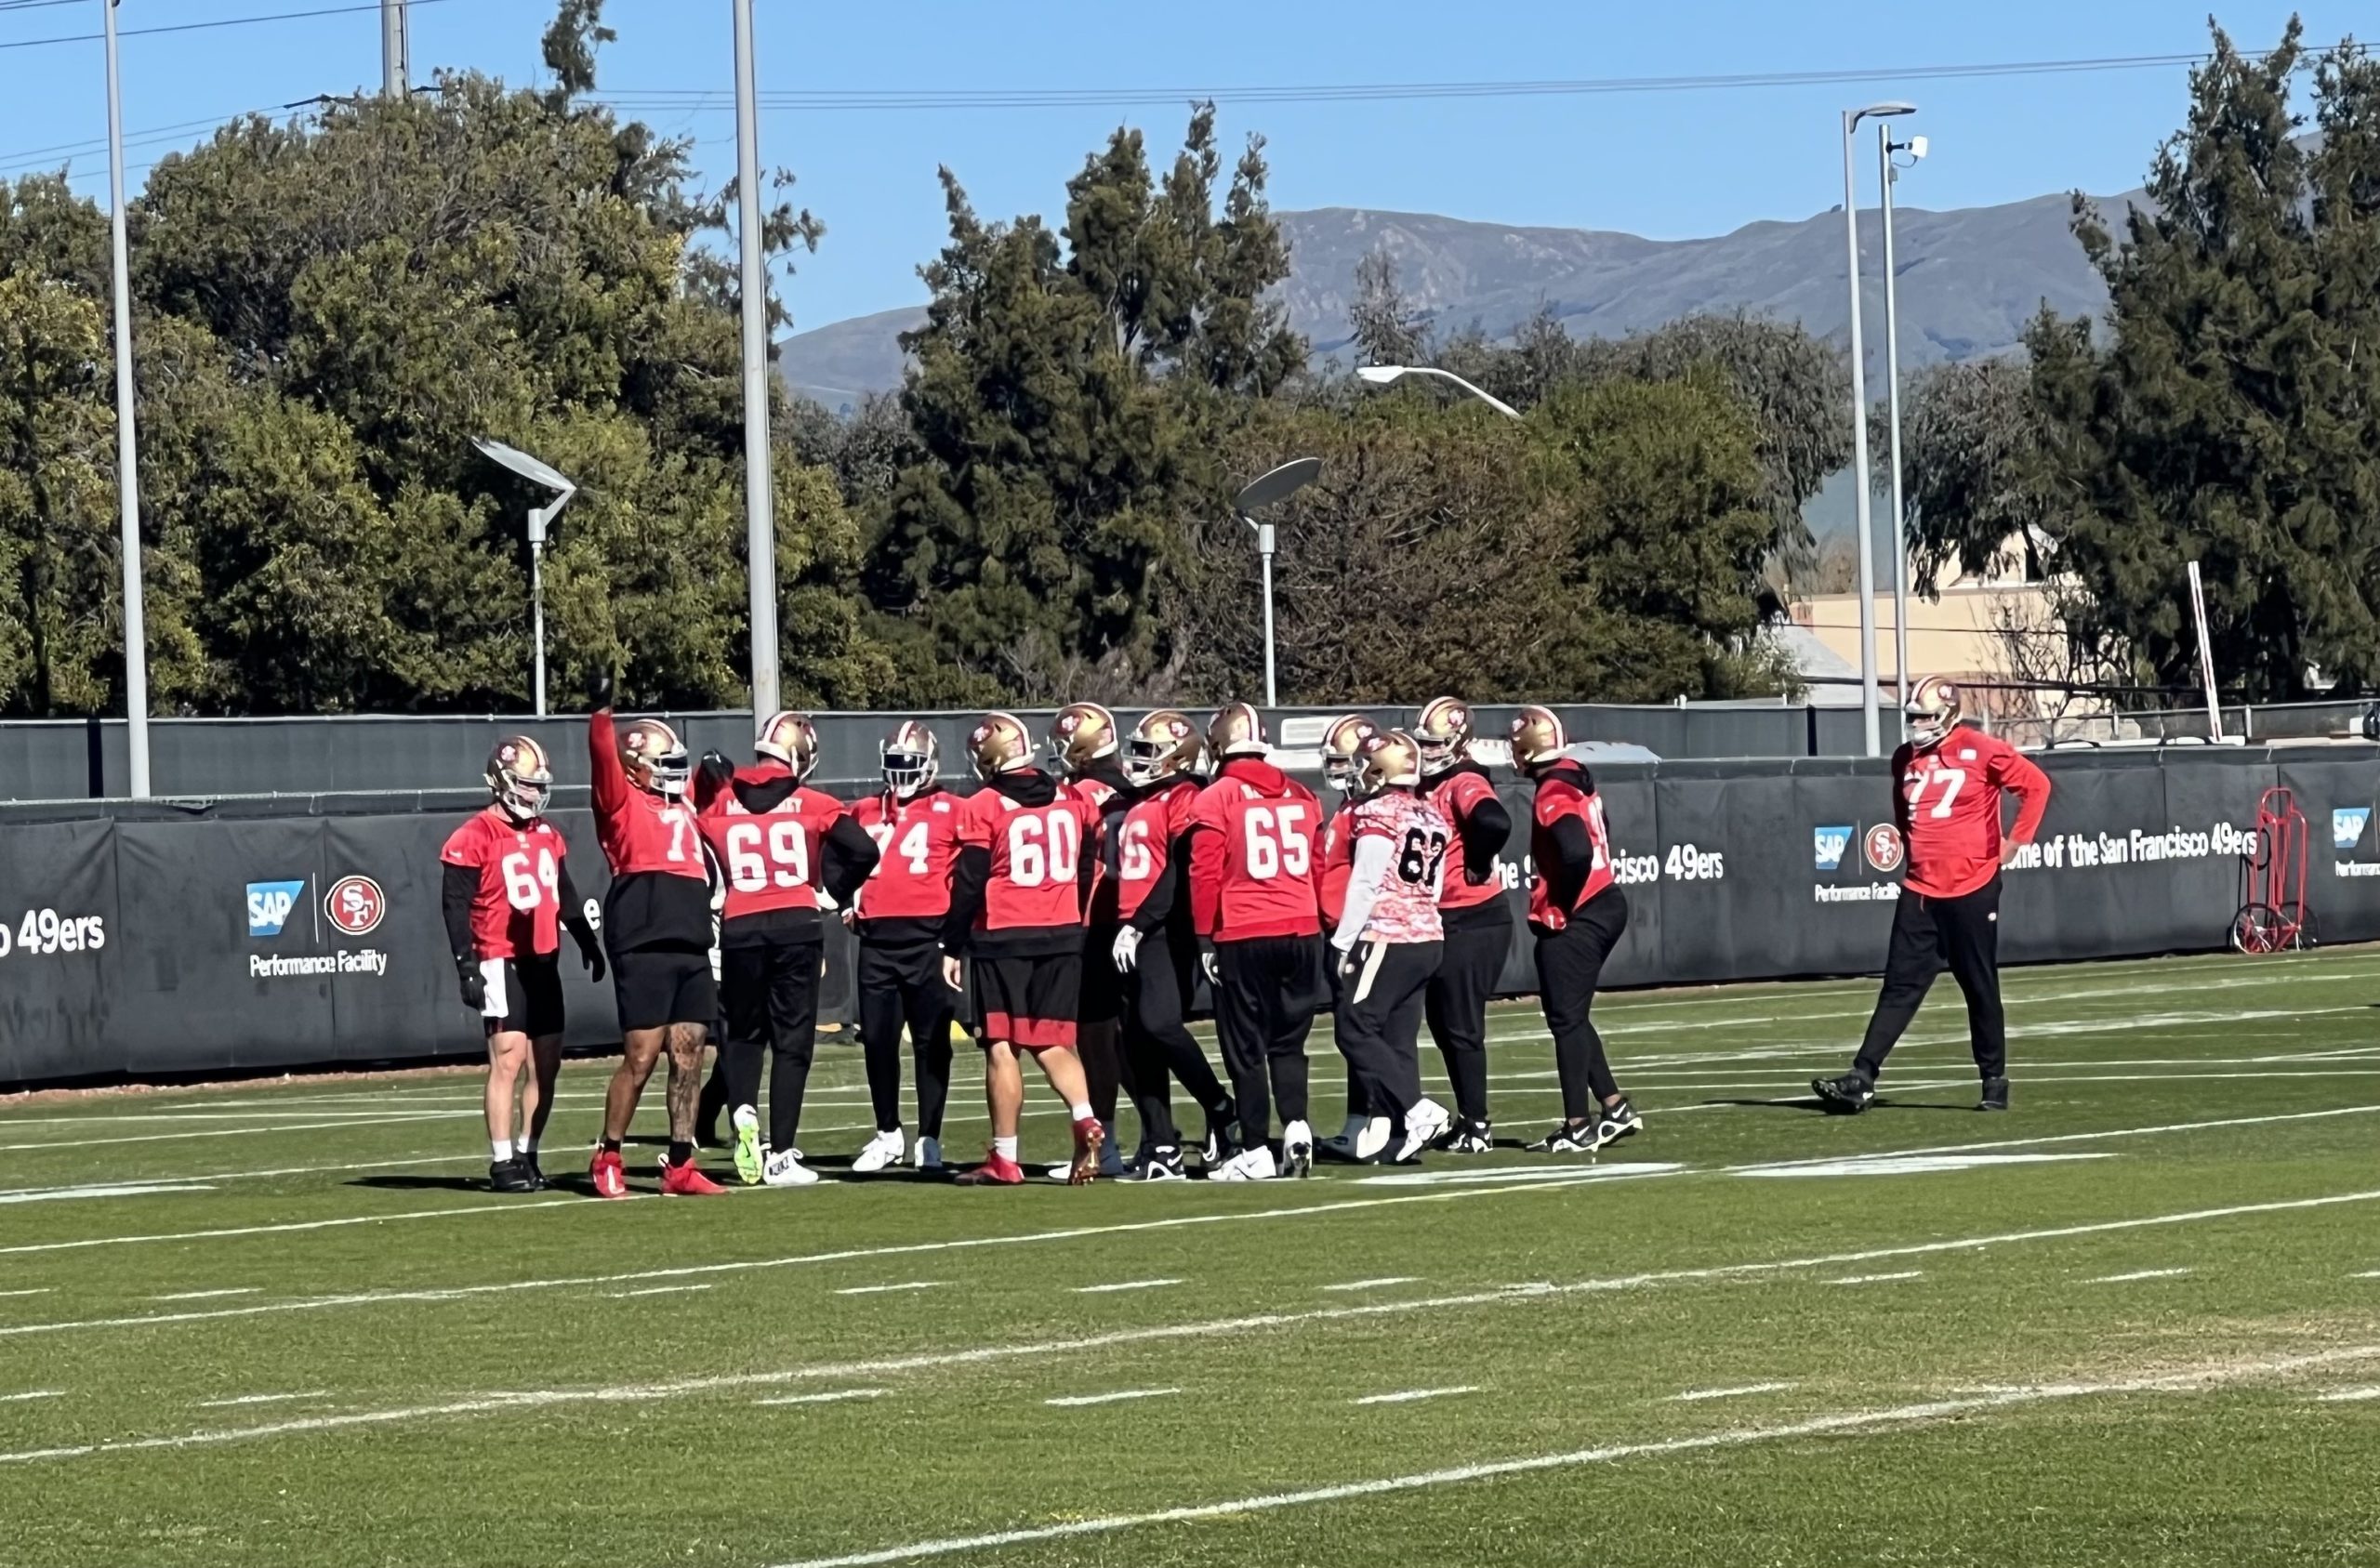 The Unsung Heroes of the 49ers Offense Live Along the Line